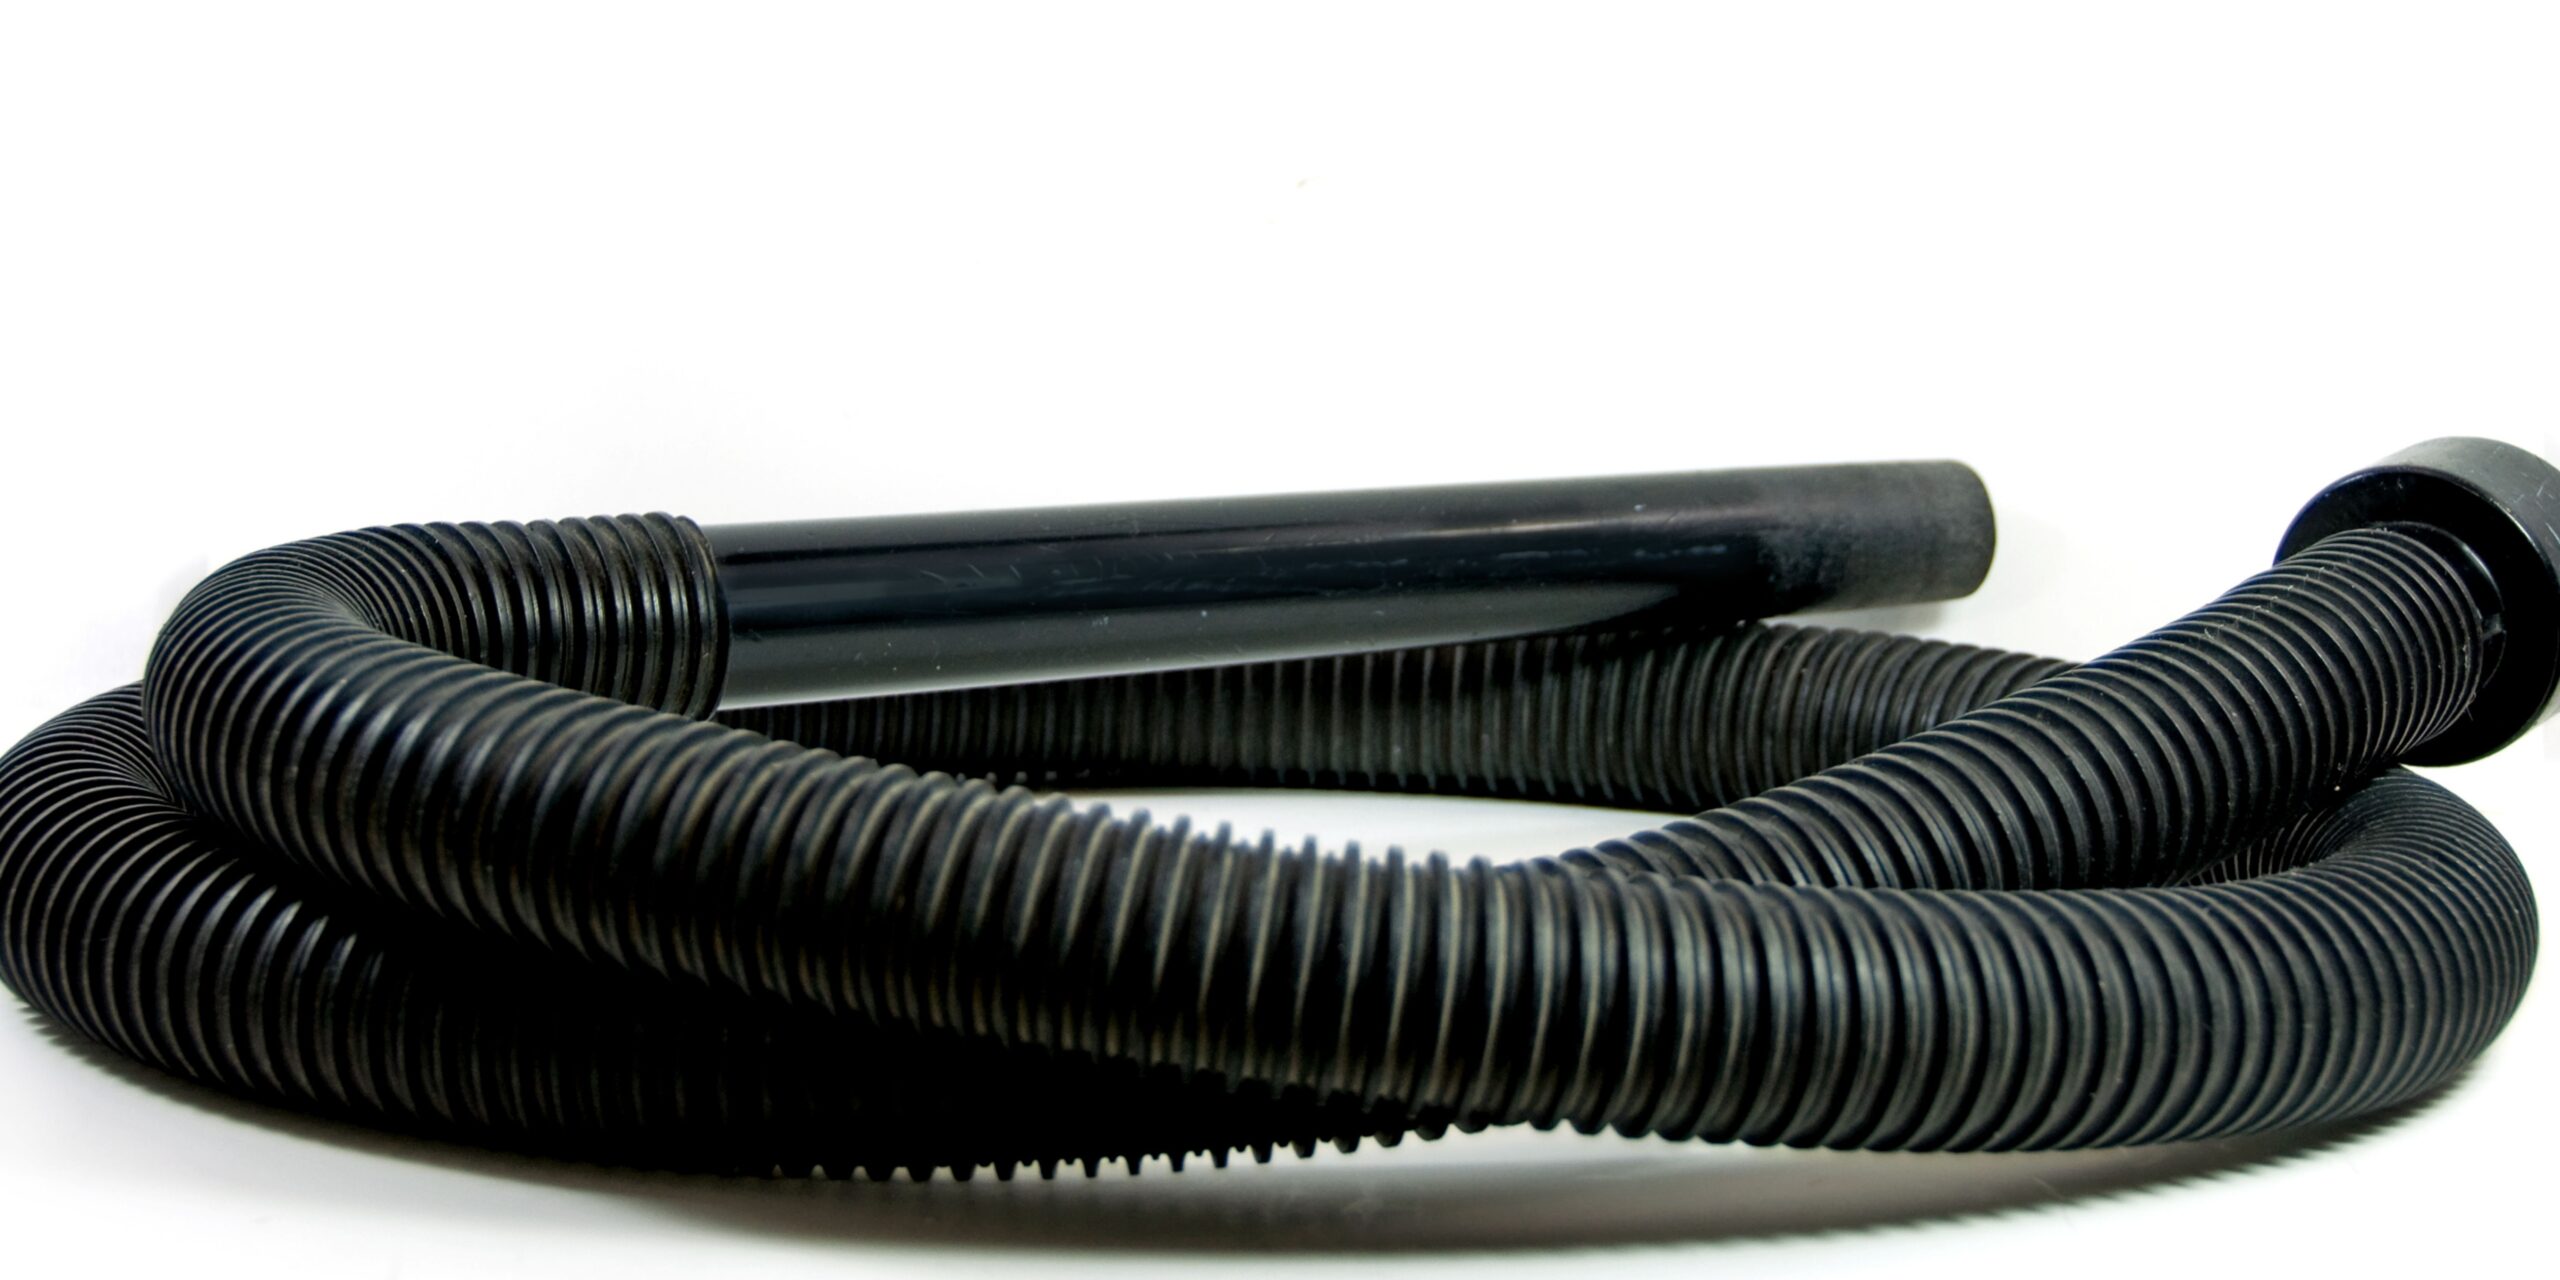 Vacuum hose from Unisource with PVC helix and abrasion resistant liners